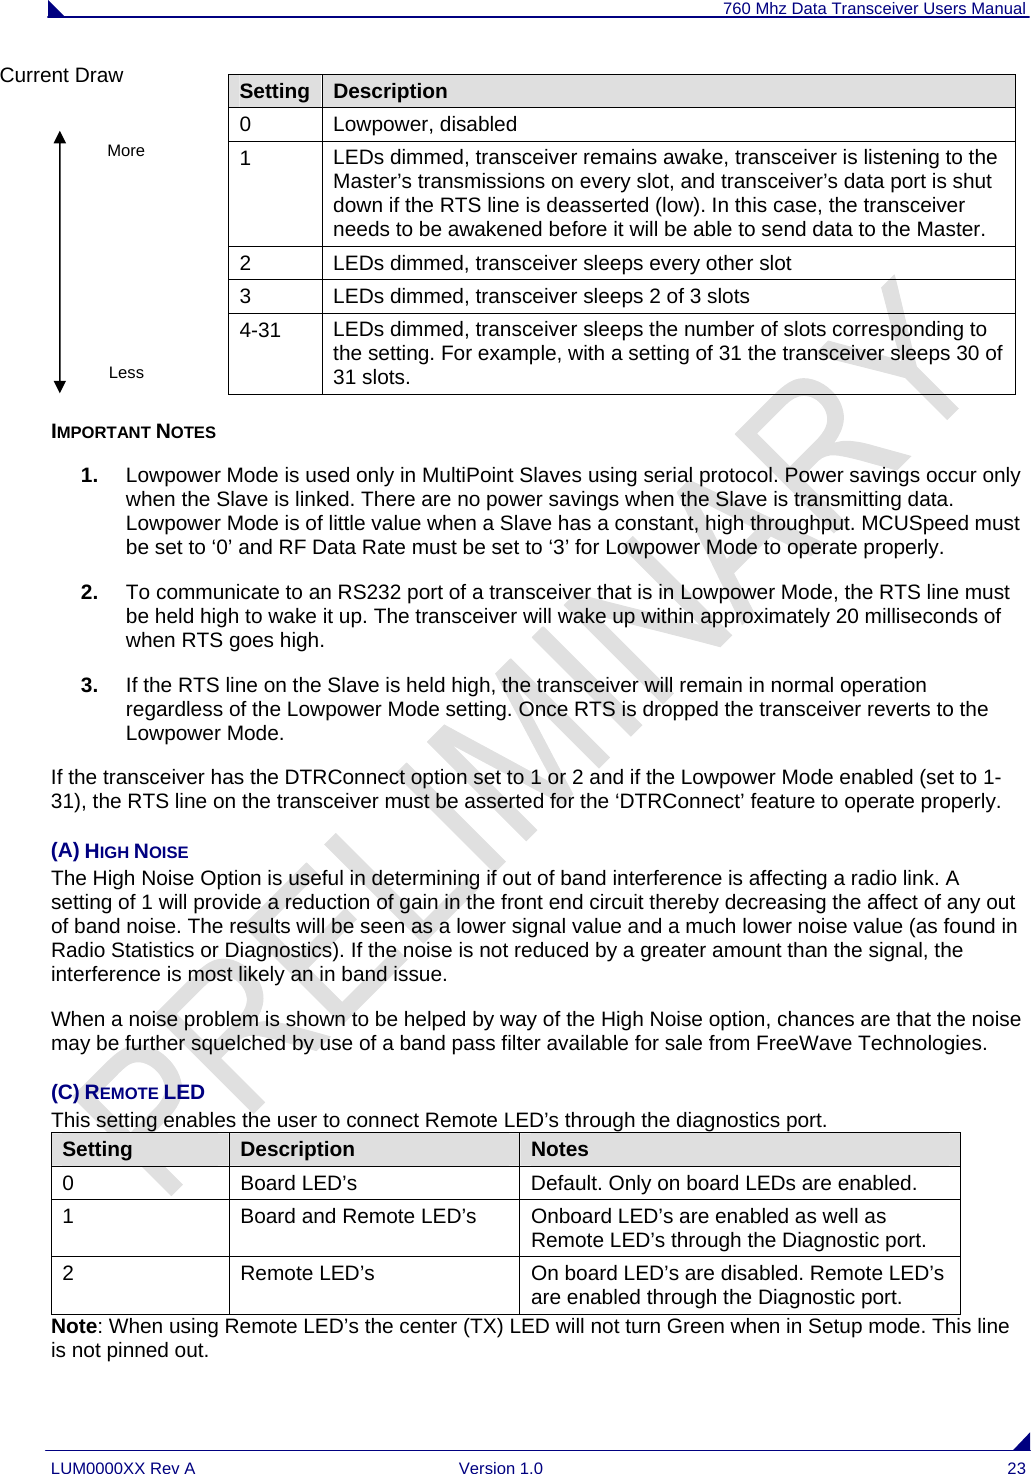 760 Mhz Data Transceiver Users Manual LUM0000XX Rev A  Version 1.0  23 Setting  Description 0 Lowpower, disabled 1  LEDs dimmed, transceiver remains awake, transceiver is listening to the Master’s transmissions on every slot, and transceiver’s data port is shut down if the RTS line is deasserted (low). In this case, the transceiver needs to be awakened before it will be able to send data to the Master. 2  LEDs dimmed, transceiver sleeps every other slot 3  LEDs dimmed, transceiver sleeps 2 of 3 slots 4-31  LEDs dimmed, transceiver sleeps the number of slots corresponding to the setting. For example, with a setting of 31 the transceiver sleeps 30 of 31 slots.  IMPORTANT NOTES 1.  Lowpower Mode is used only in MultiPoint Slaves using serial protocol. Power savings occur only when the Slave is linked. There are no power savings when the Slave is transmitting data. Lowpower Mode is of little value when a Slave has a constant, high throughput. MCUSpeed must be set to ‘0’ and RF Data Rate must be set to ‘3’ for Lowpower Mode to operate properly. 2.  To communicate to an RS232 port of a transceiver that is in Lowpower Mode, the RTS line must be held high to wake it up. The transceiver will wake up within approximately 20 milliseconds of when RTS goes high. 3.  If the RTS line on the Slave is held high, the transceiver will remain in normal operation regardless of the Lowpower Mode setting. Once RTS is dropped the transceiver reverts to the Lowpower Mode.  If the transceiver has the DTRConnect option set to 1 or 2 and if the Lowpower Mode enabled (set to 1-31), the RTS line on the transceiver must be asserted for the ‘DTRConnect’ feature to operate properly. (A) HIGH NOISE The High Noise Option is useful in determining if out of band interference is affecting a radio link. A setting of 1 will provide a reduction of gain in the front end circuit thereby decreasing the affect of any out of band noise. The results will be seen as a lower signal value and a much lower noise value (as found in Radio Statistics or Diagnostics). If the noise is not reduced by a greater amount than the signal, the interference is most likely an in band issue.  When a noise problem is shown to be helped by way of the High Noise option, chances are that the noise may be further squelched by use of a band pass filter available for sale from FreeWave Technologies. (C) REMOTE LED This setting enables the user to connect Remote LED’s through the diagnostics port.  Setting  Description  Notes 0  Board LED’s  Default. Only on board LEDs are enabled.  1  Board and Remote LED’s  Onboard LED’s are enabled as well as Remote LED’s through the Diagnostic port. 2 Remote LED’s On board LED’s are disabled. Remote LED’s are enabled through the Diagnostic port. Note: When using Remote LED’s the center (TX) LED will not turn Green when in Setup mode. This line is not pinned out. Current Draw More Less 